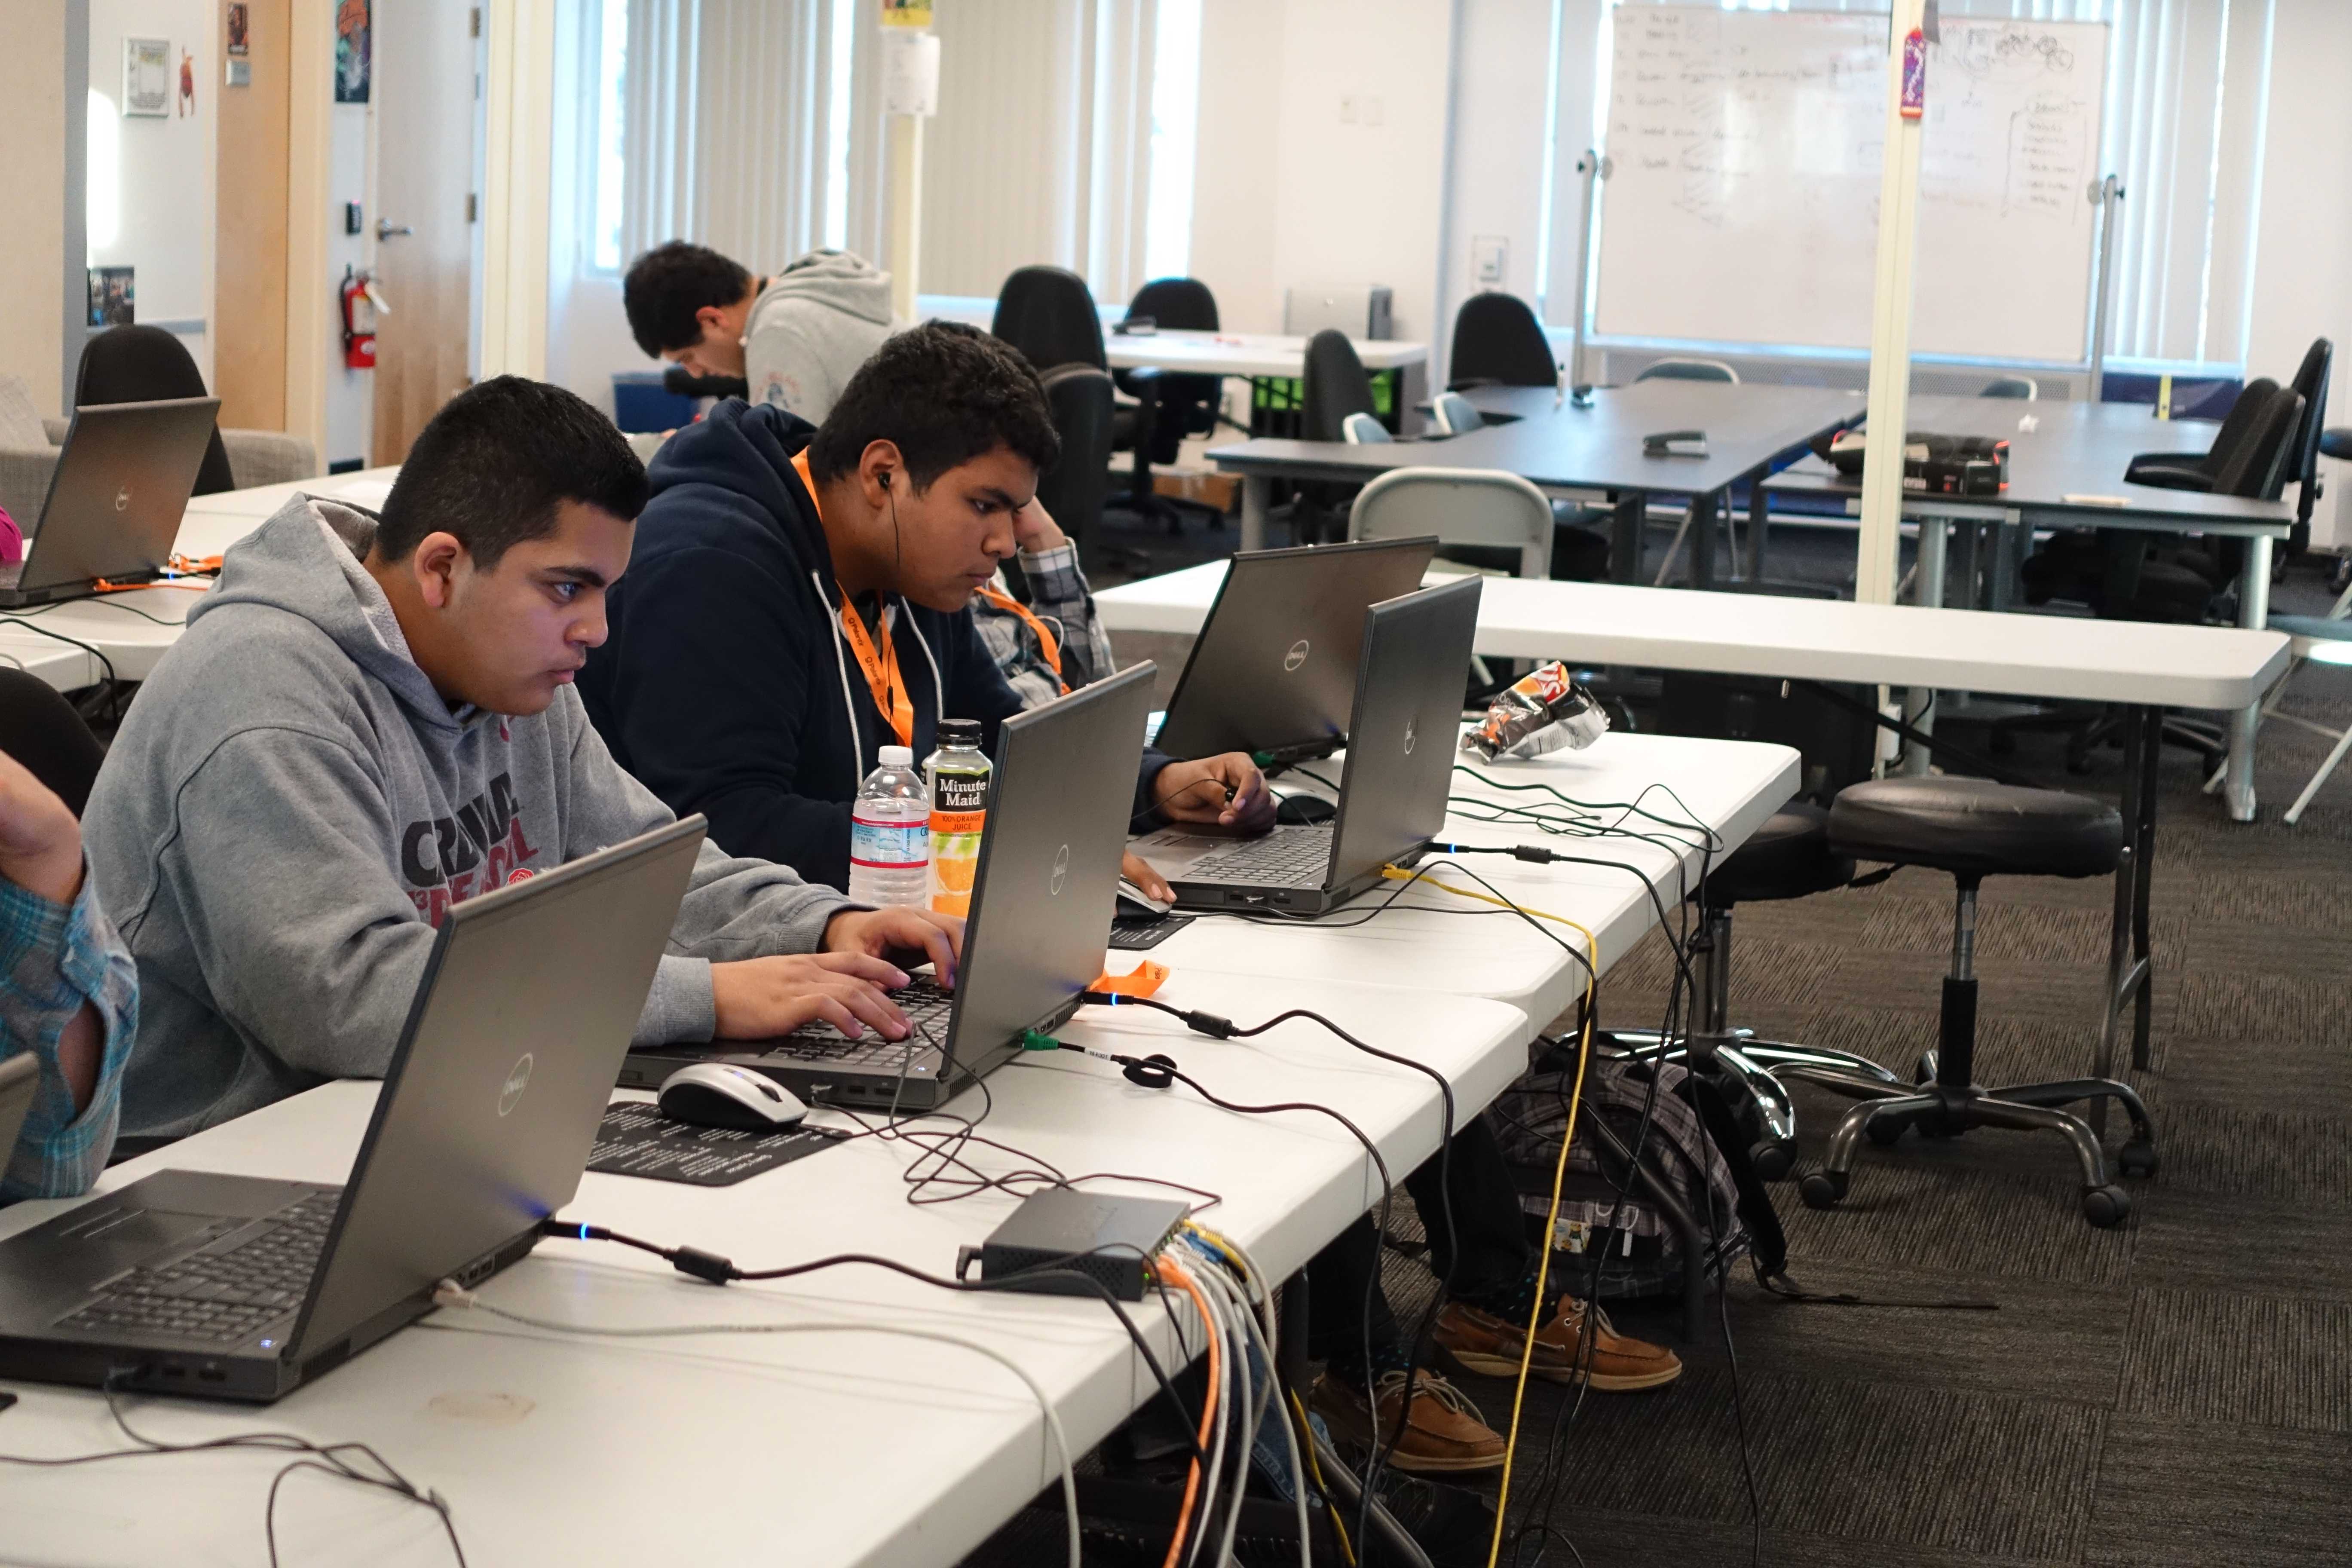 Catching the train to success: coding classes for low income students